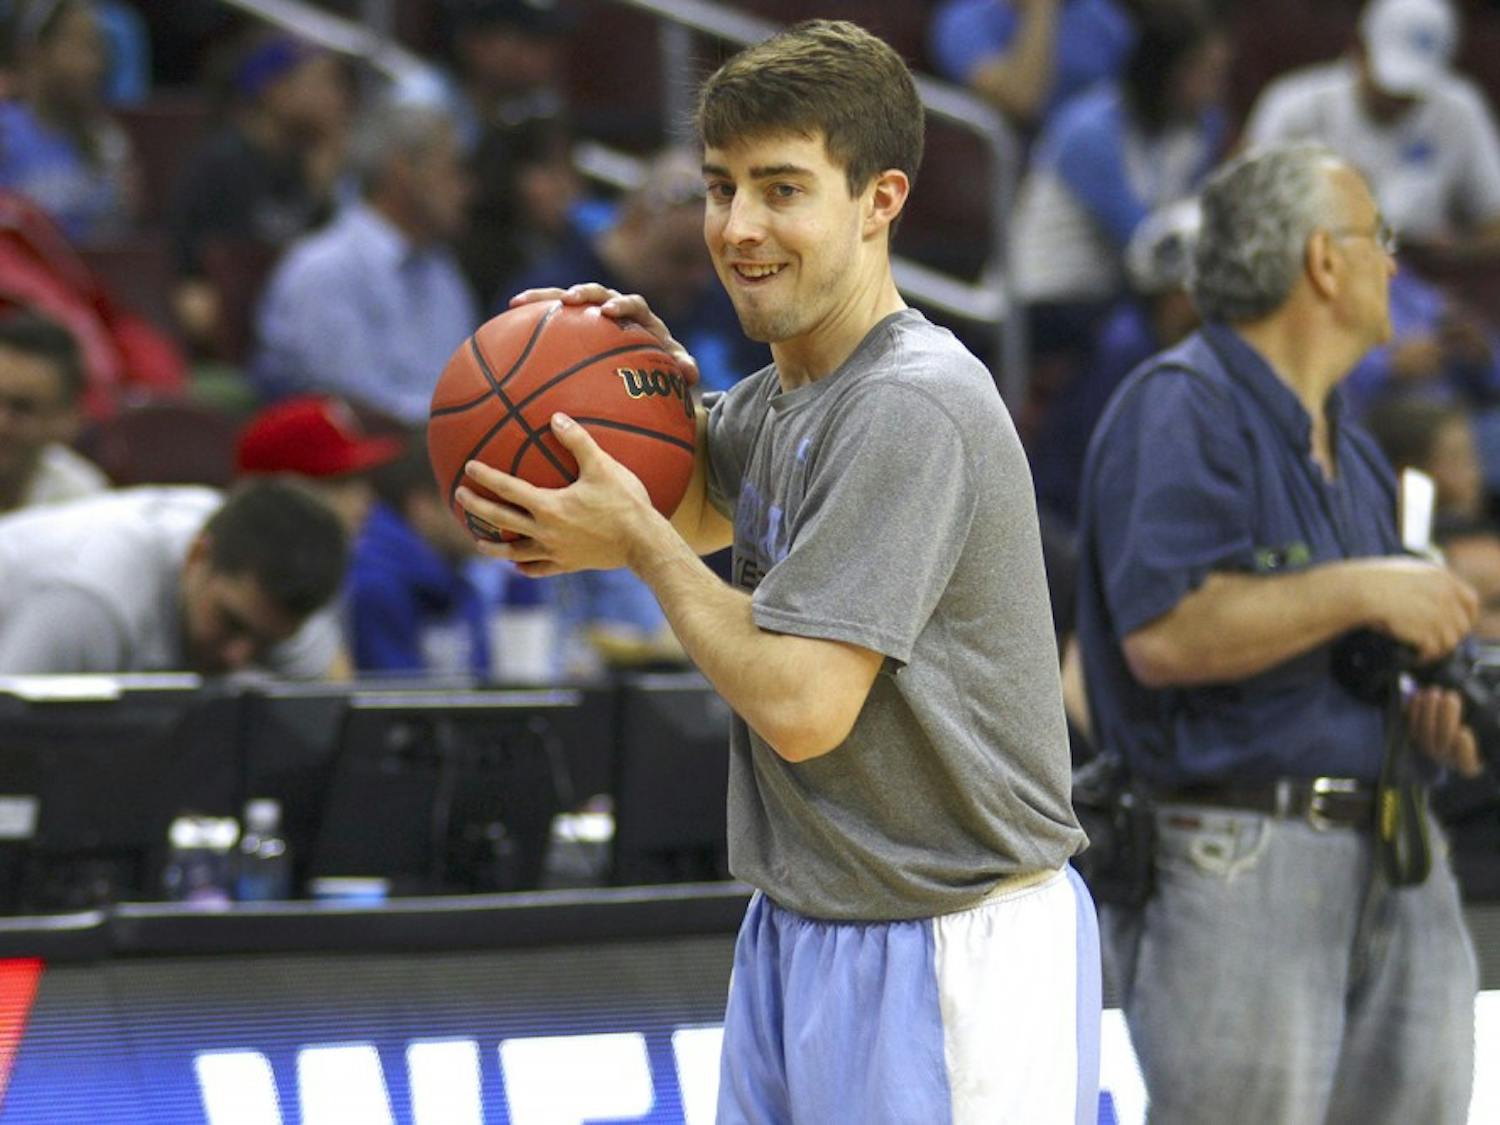 Manager Forrest Reynolds passes the ball during warm ups before the Elite Eight game against Notre Dame. UNC won 88-74.